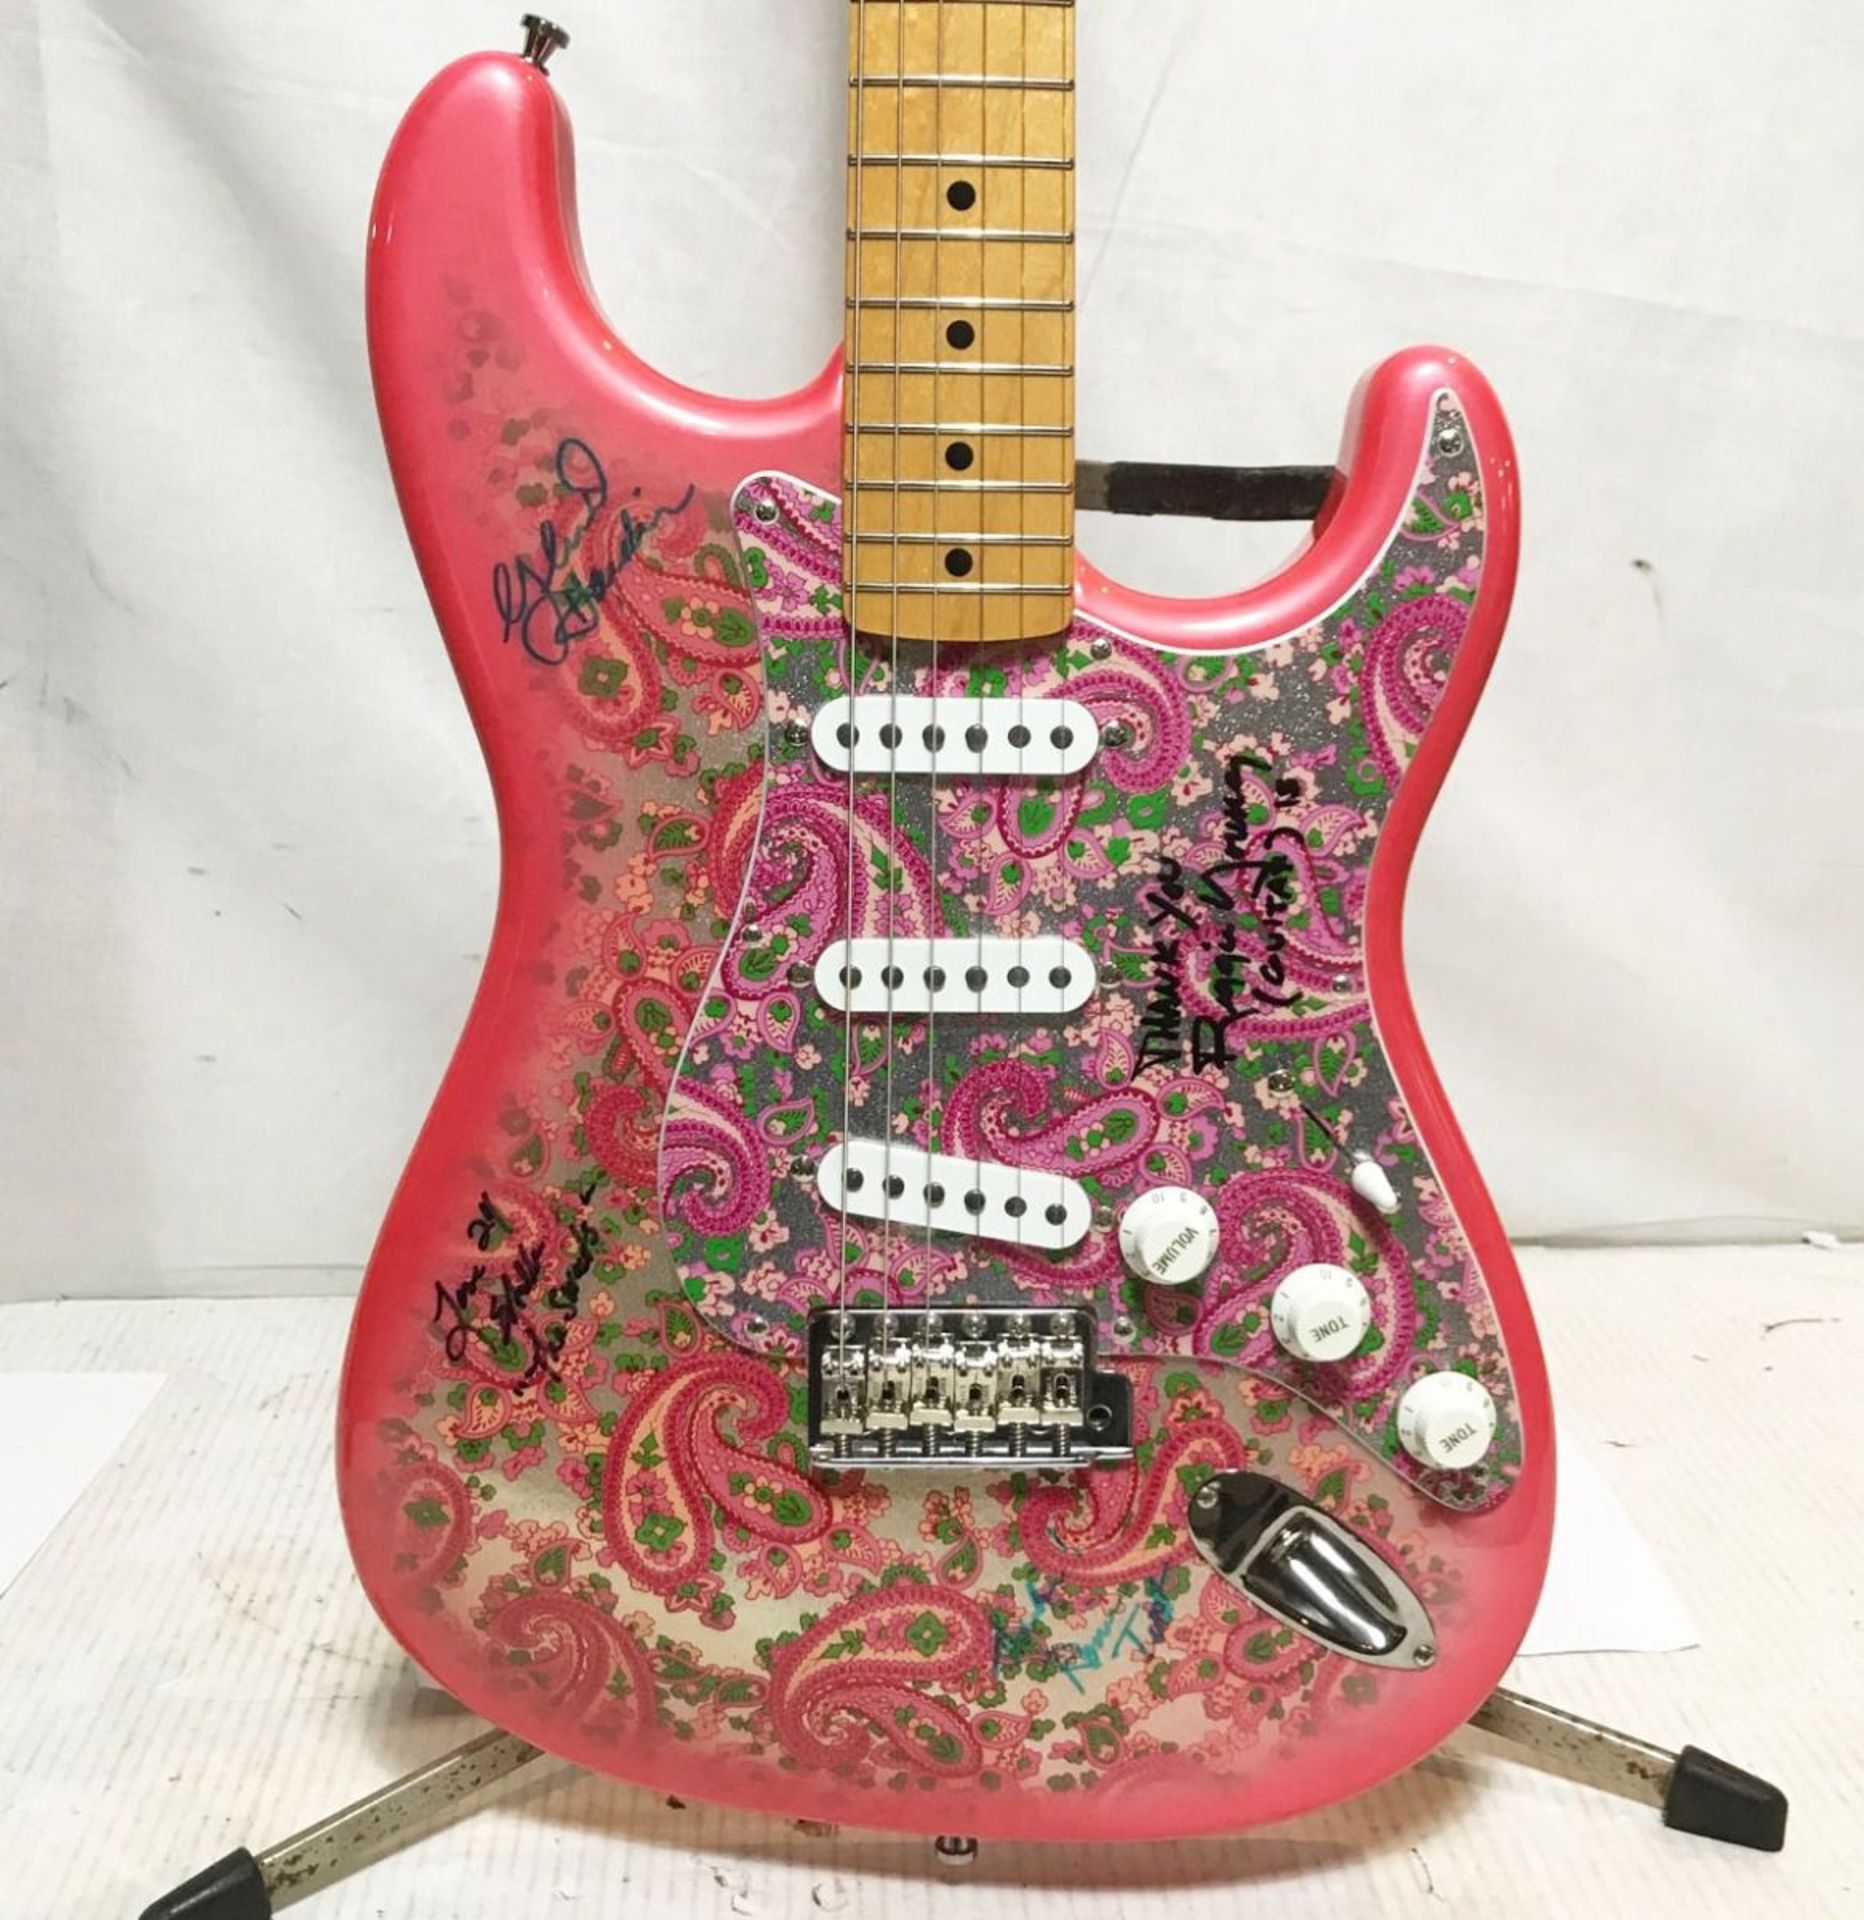 Fender Stratocaster Paisley Guitar Signed By Elvis Presley's Band Members